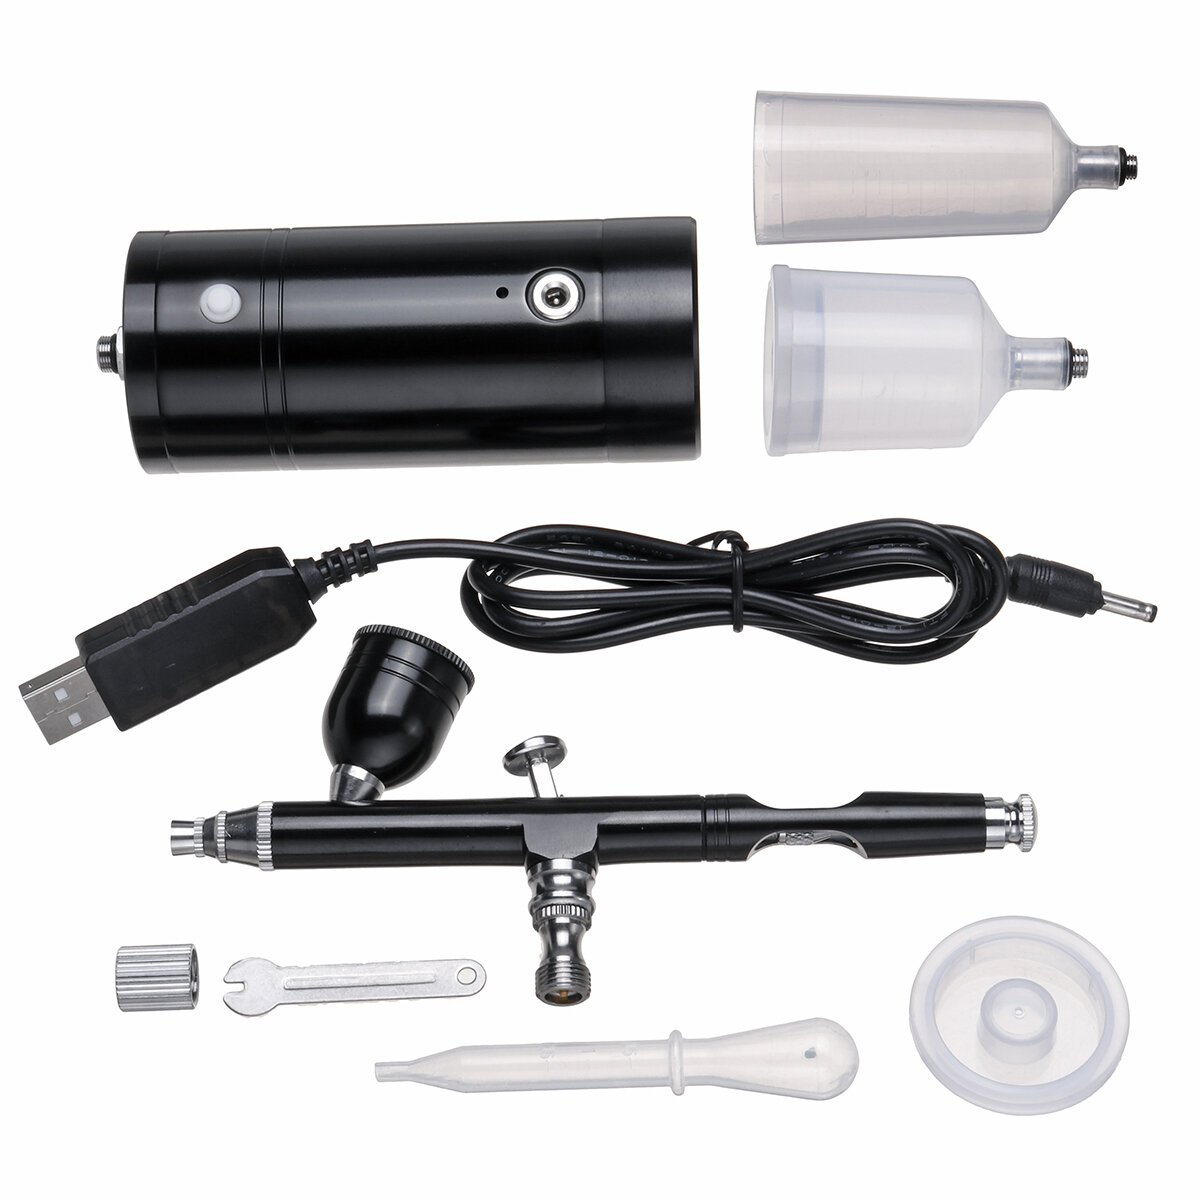 Black Portable Rechargeable Mini Electric Small Airbrush Air Pump Set Marker Pen Atmospheric Pressure Model Spray Paint